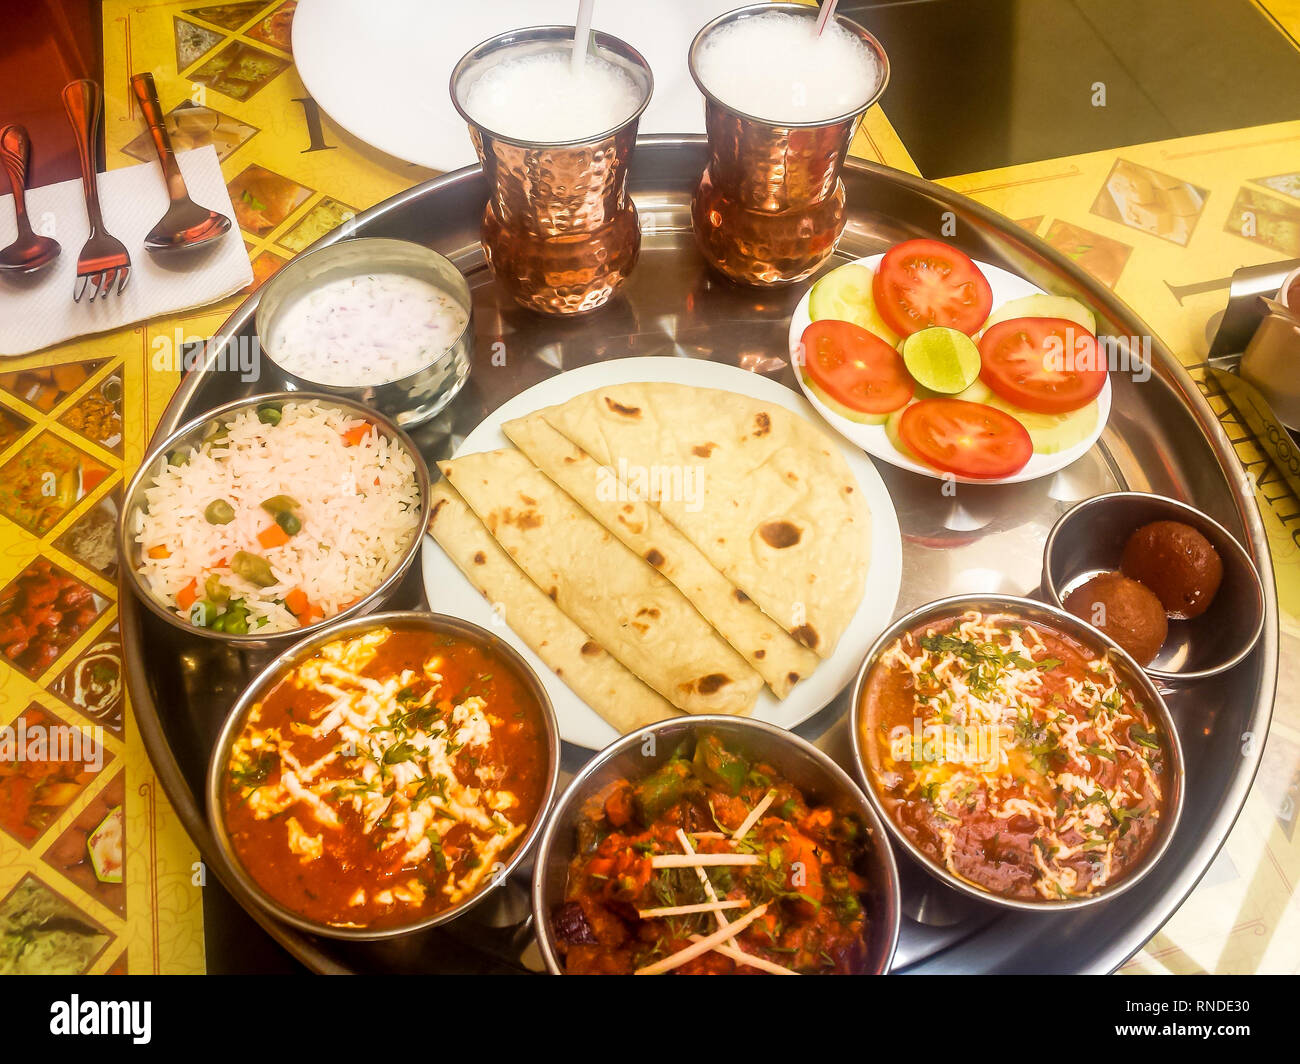 Indian Food Circle of Indian Dishes and Drinks Stock Photo